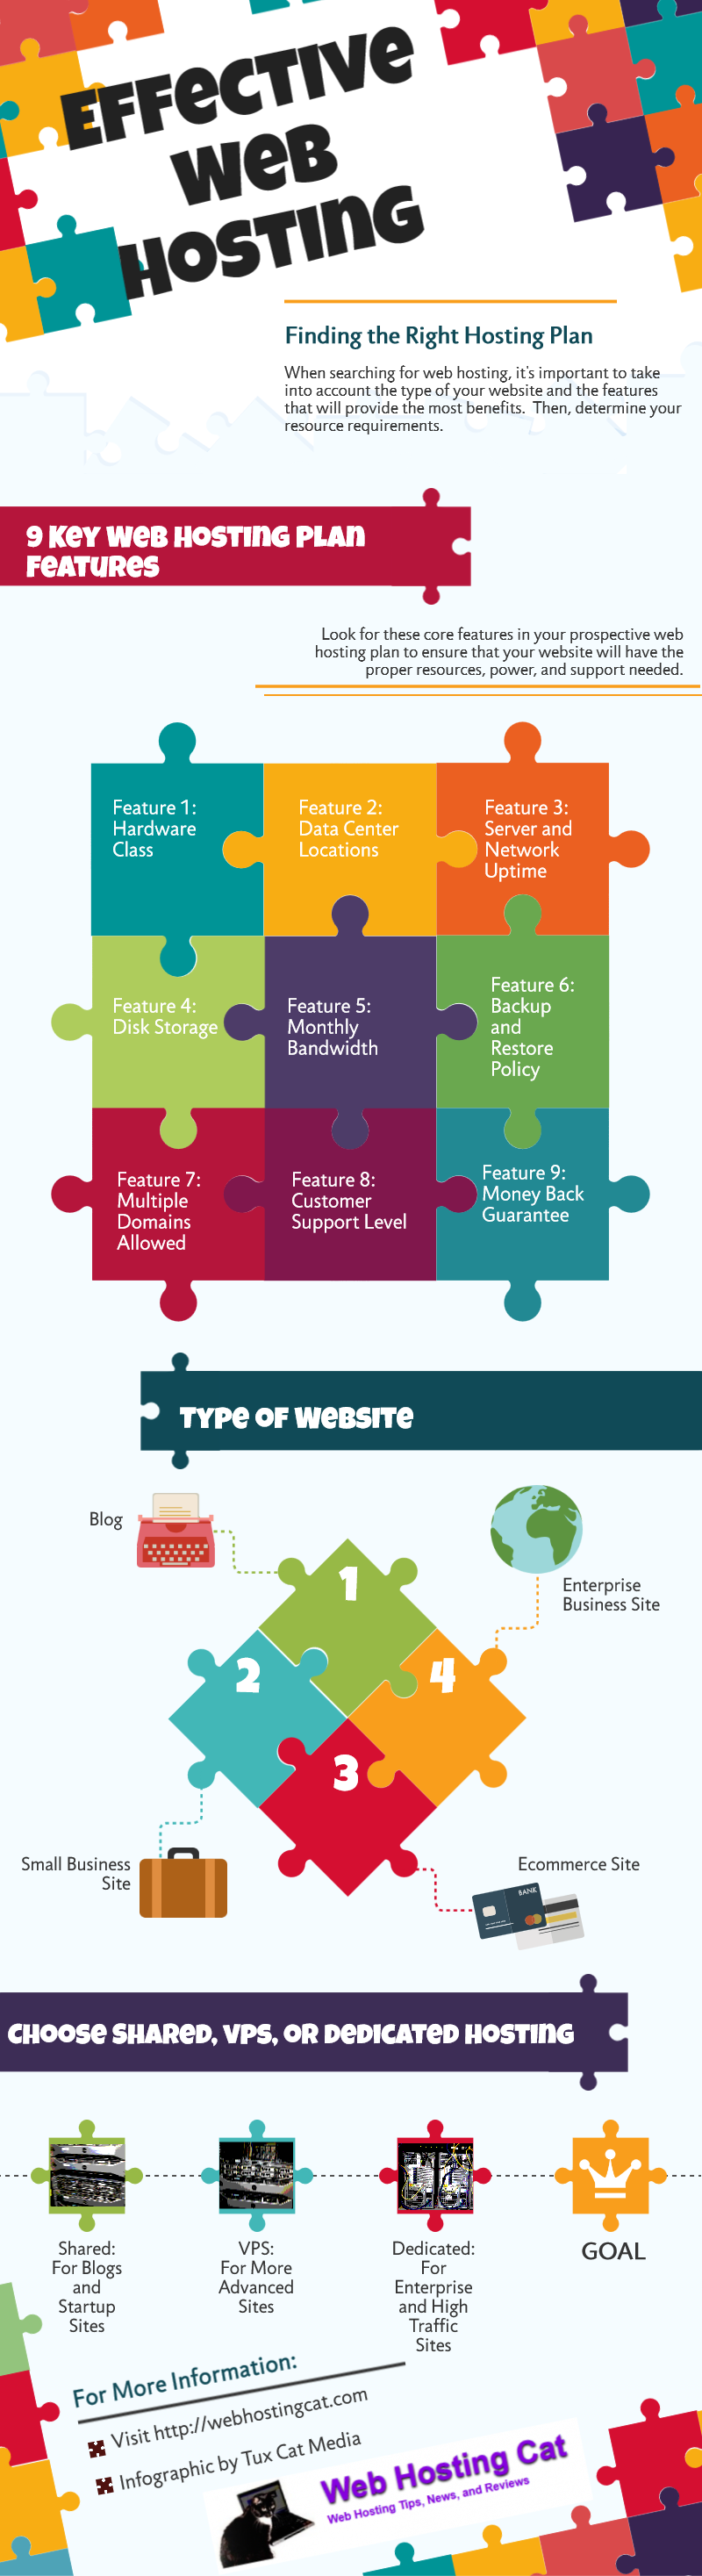 Effective Elements Of A Web Hosting Plan